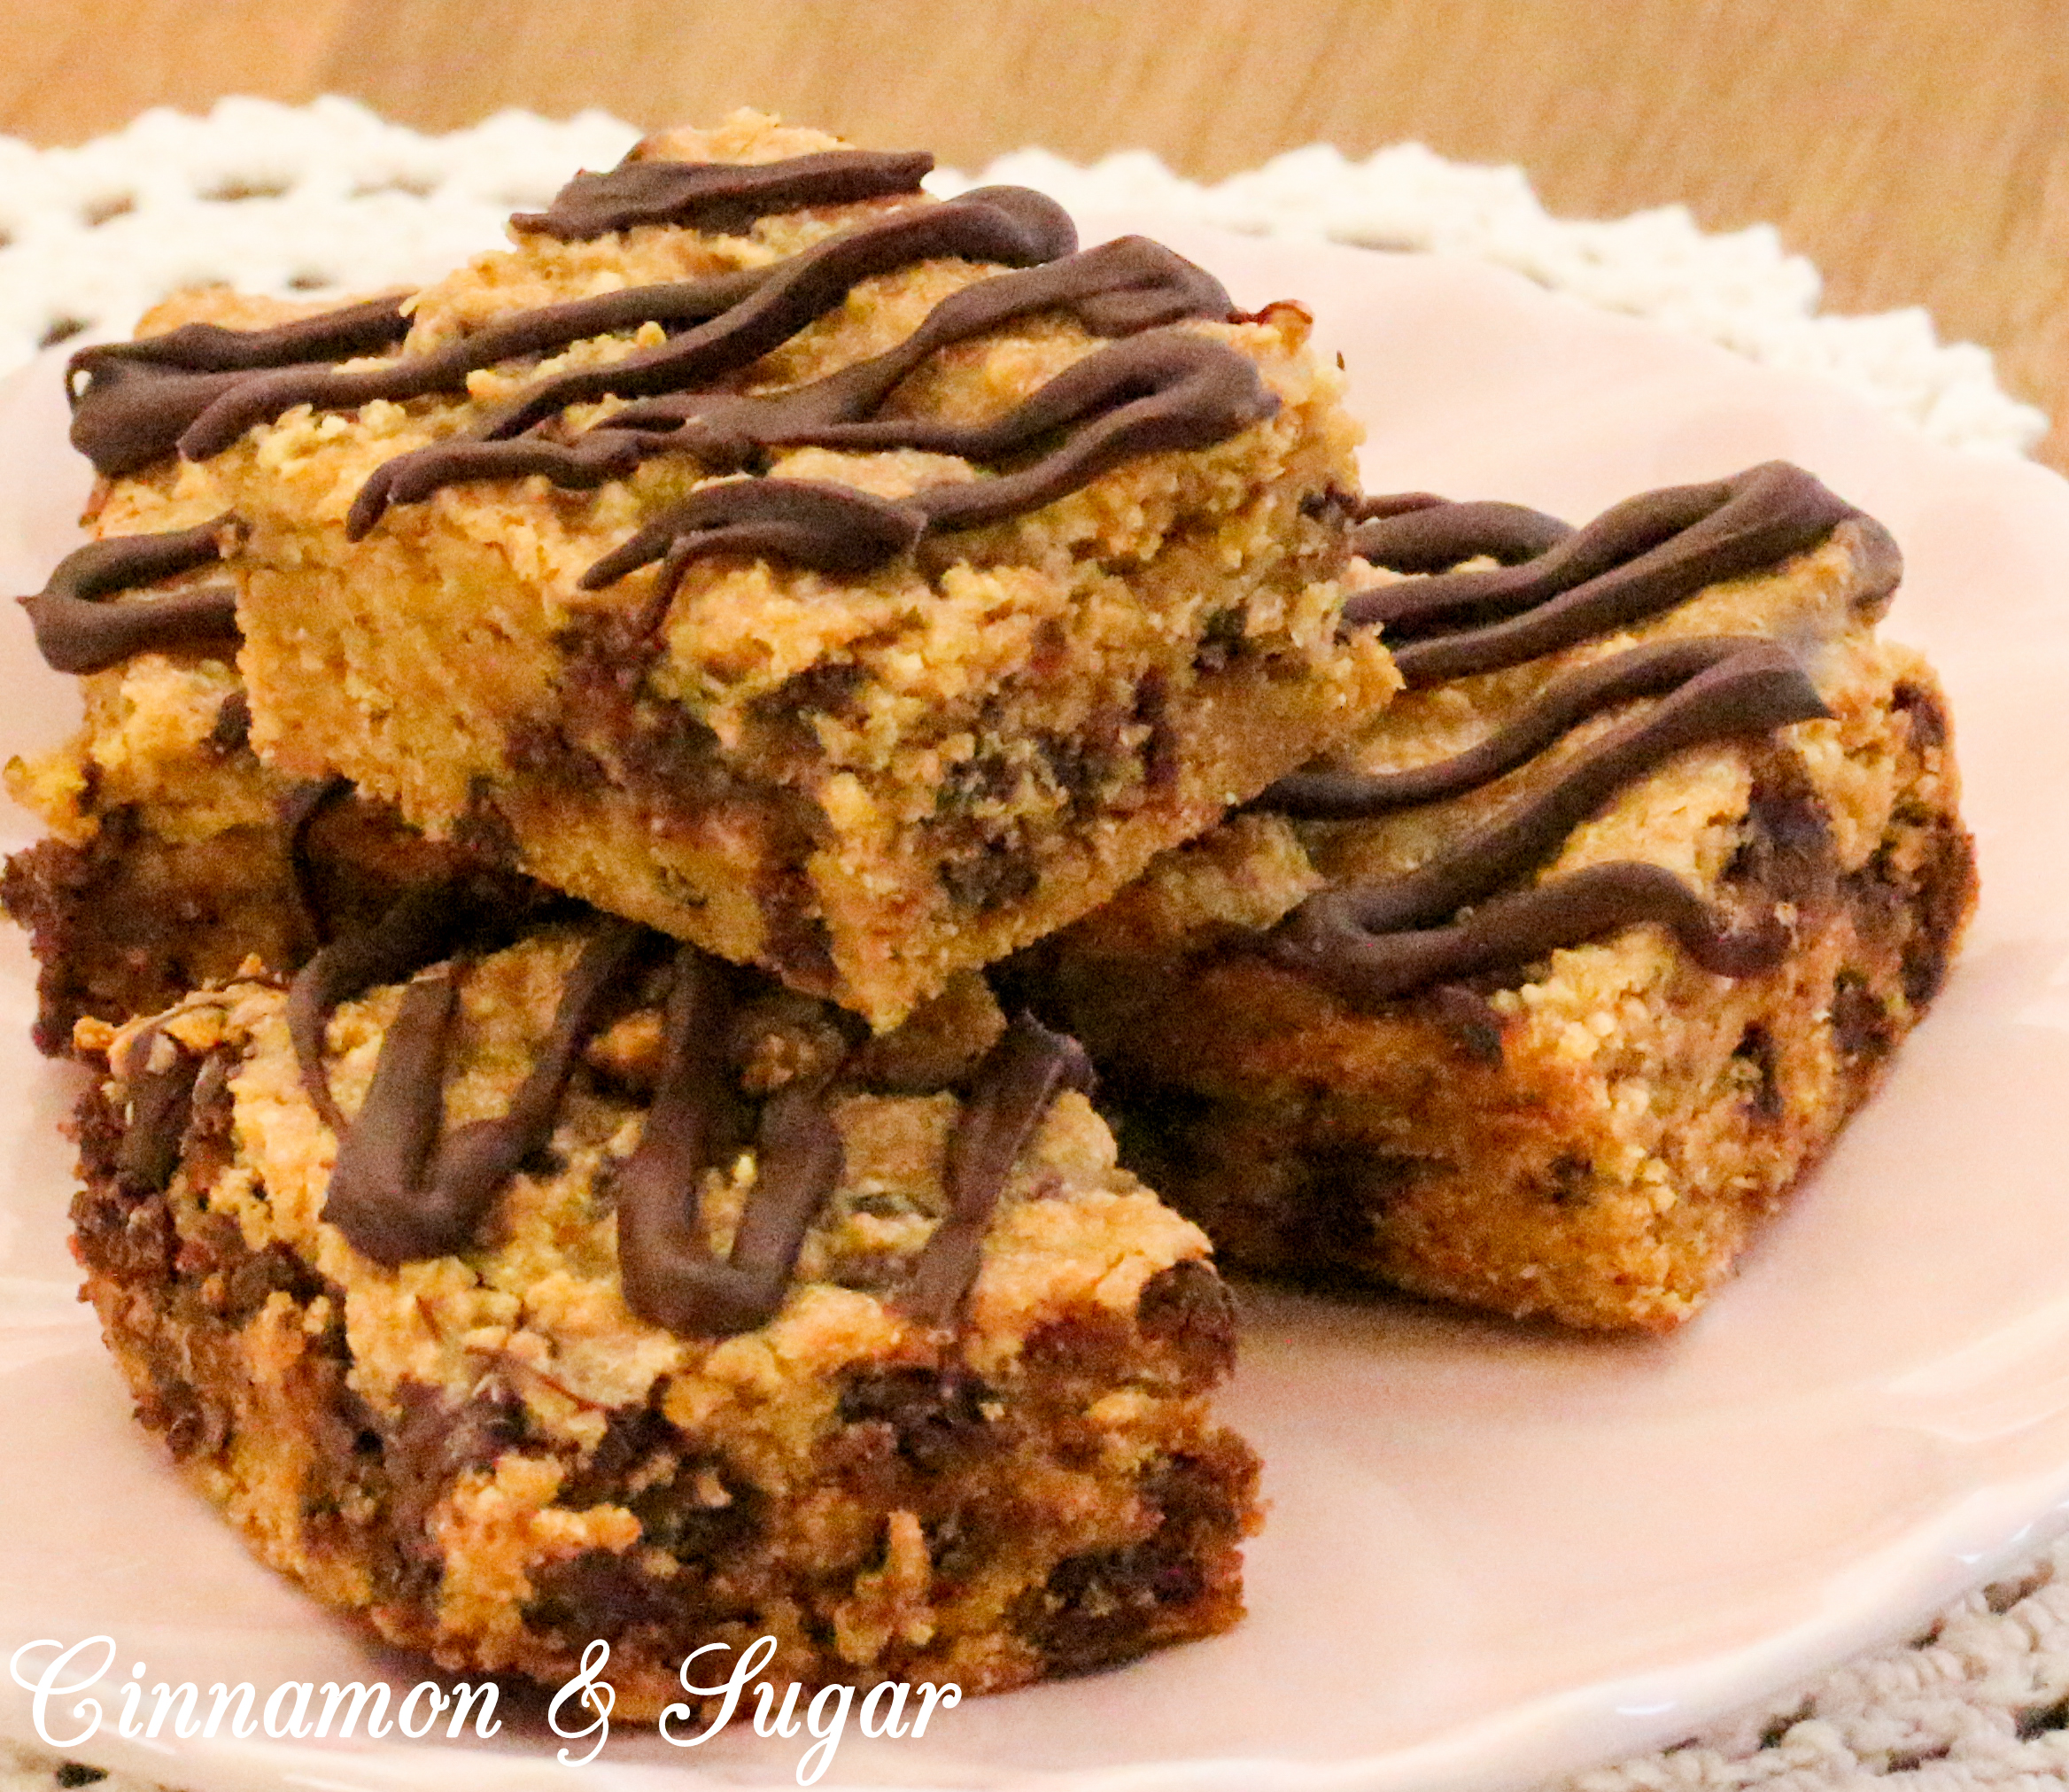 Penn's Surprisingly Simple Chocolate Chip Brownies uses only THREE pantry staple ingredients, yet the results create a delicous, chocolatey treat! Recipe shared with permission granted by Dorothy St. James, author of BONBON WITH THE WIND.